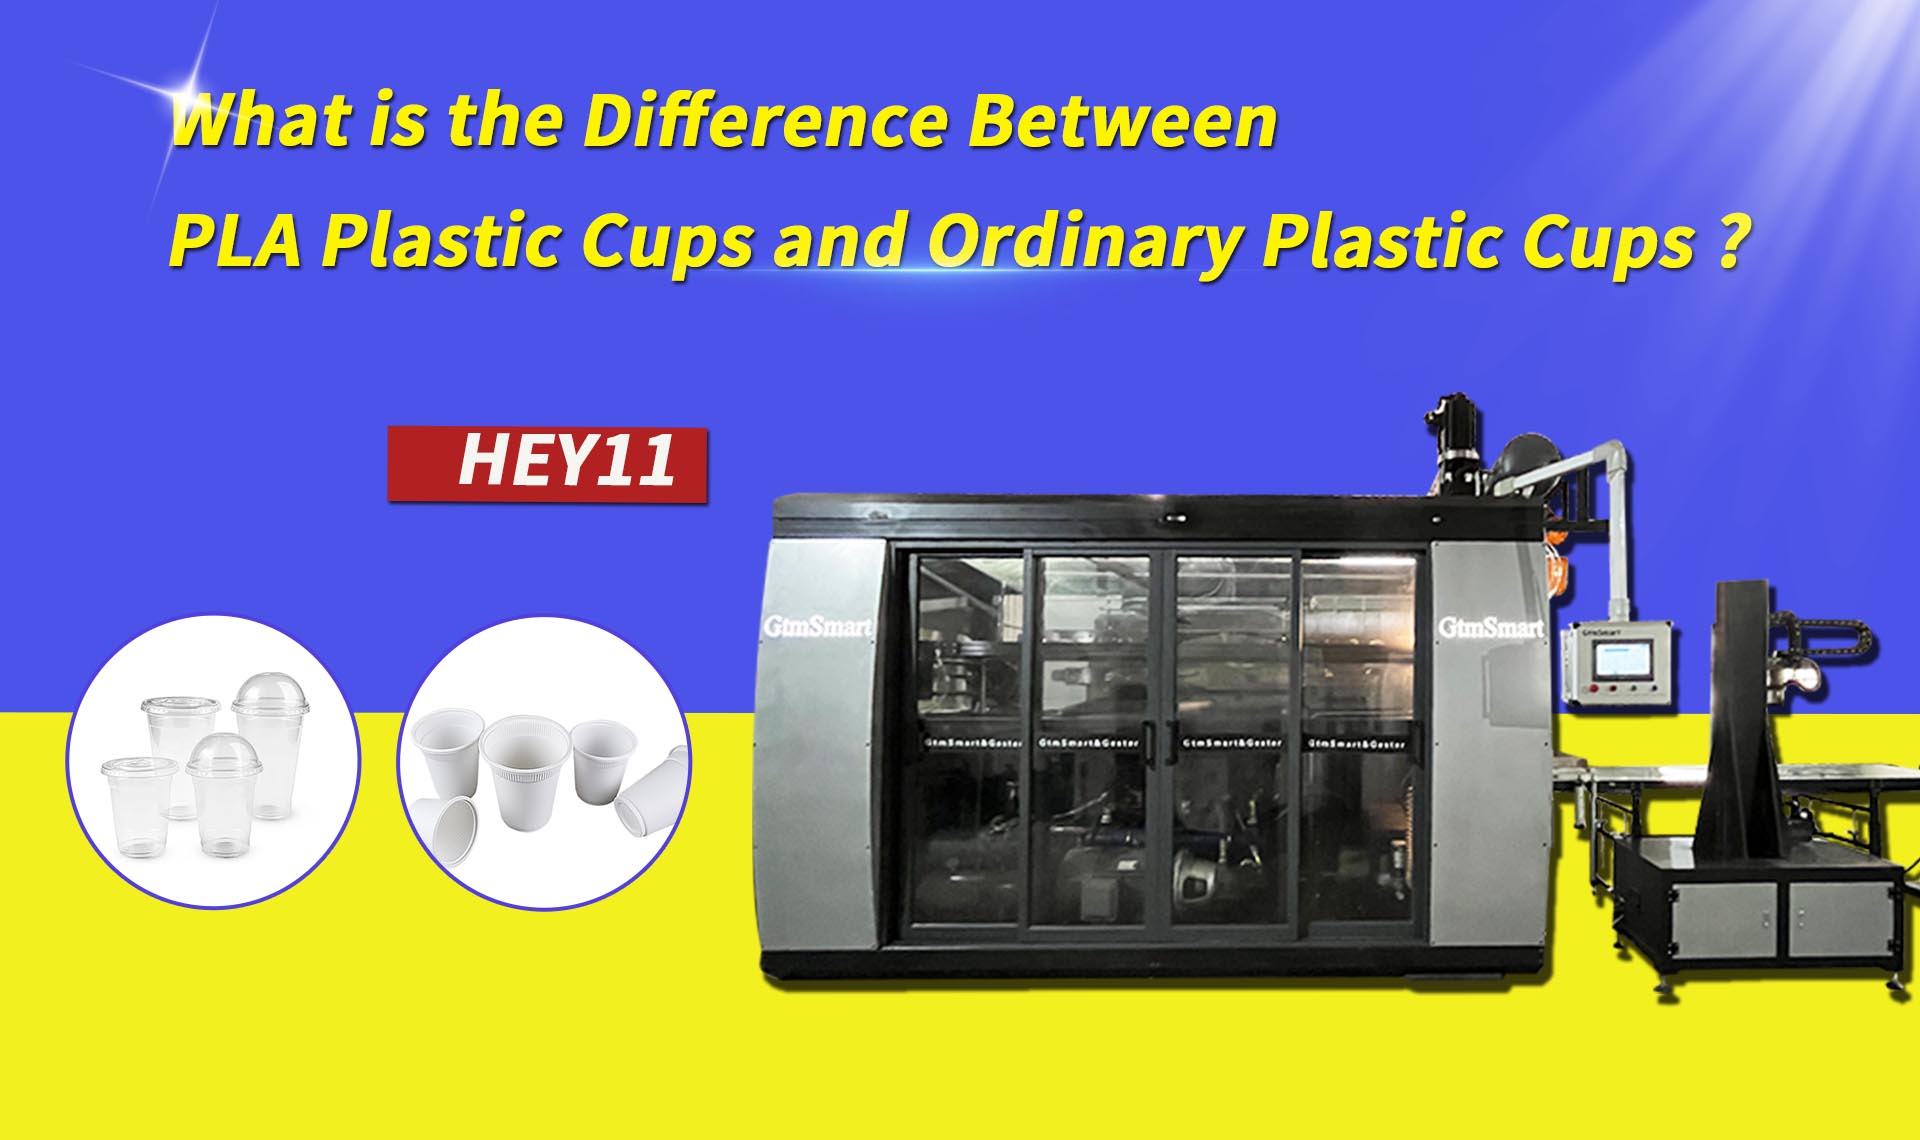 What is the Difference Between PLA Plastic Cups and Ordinary Plastic Cups ?